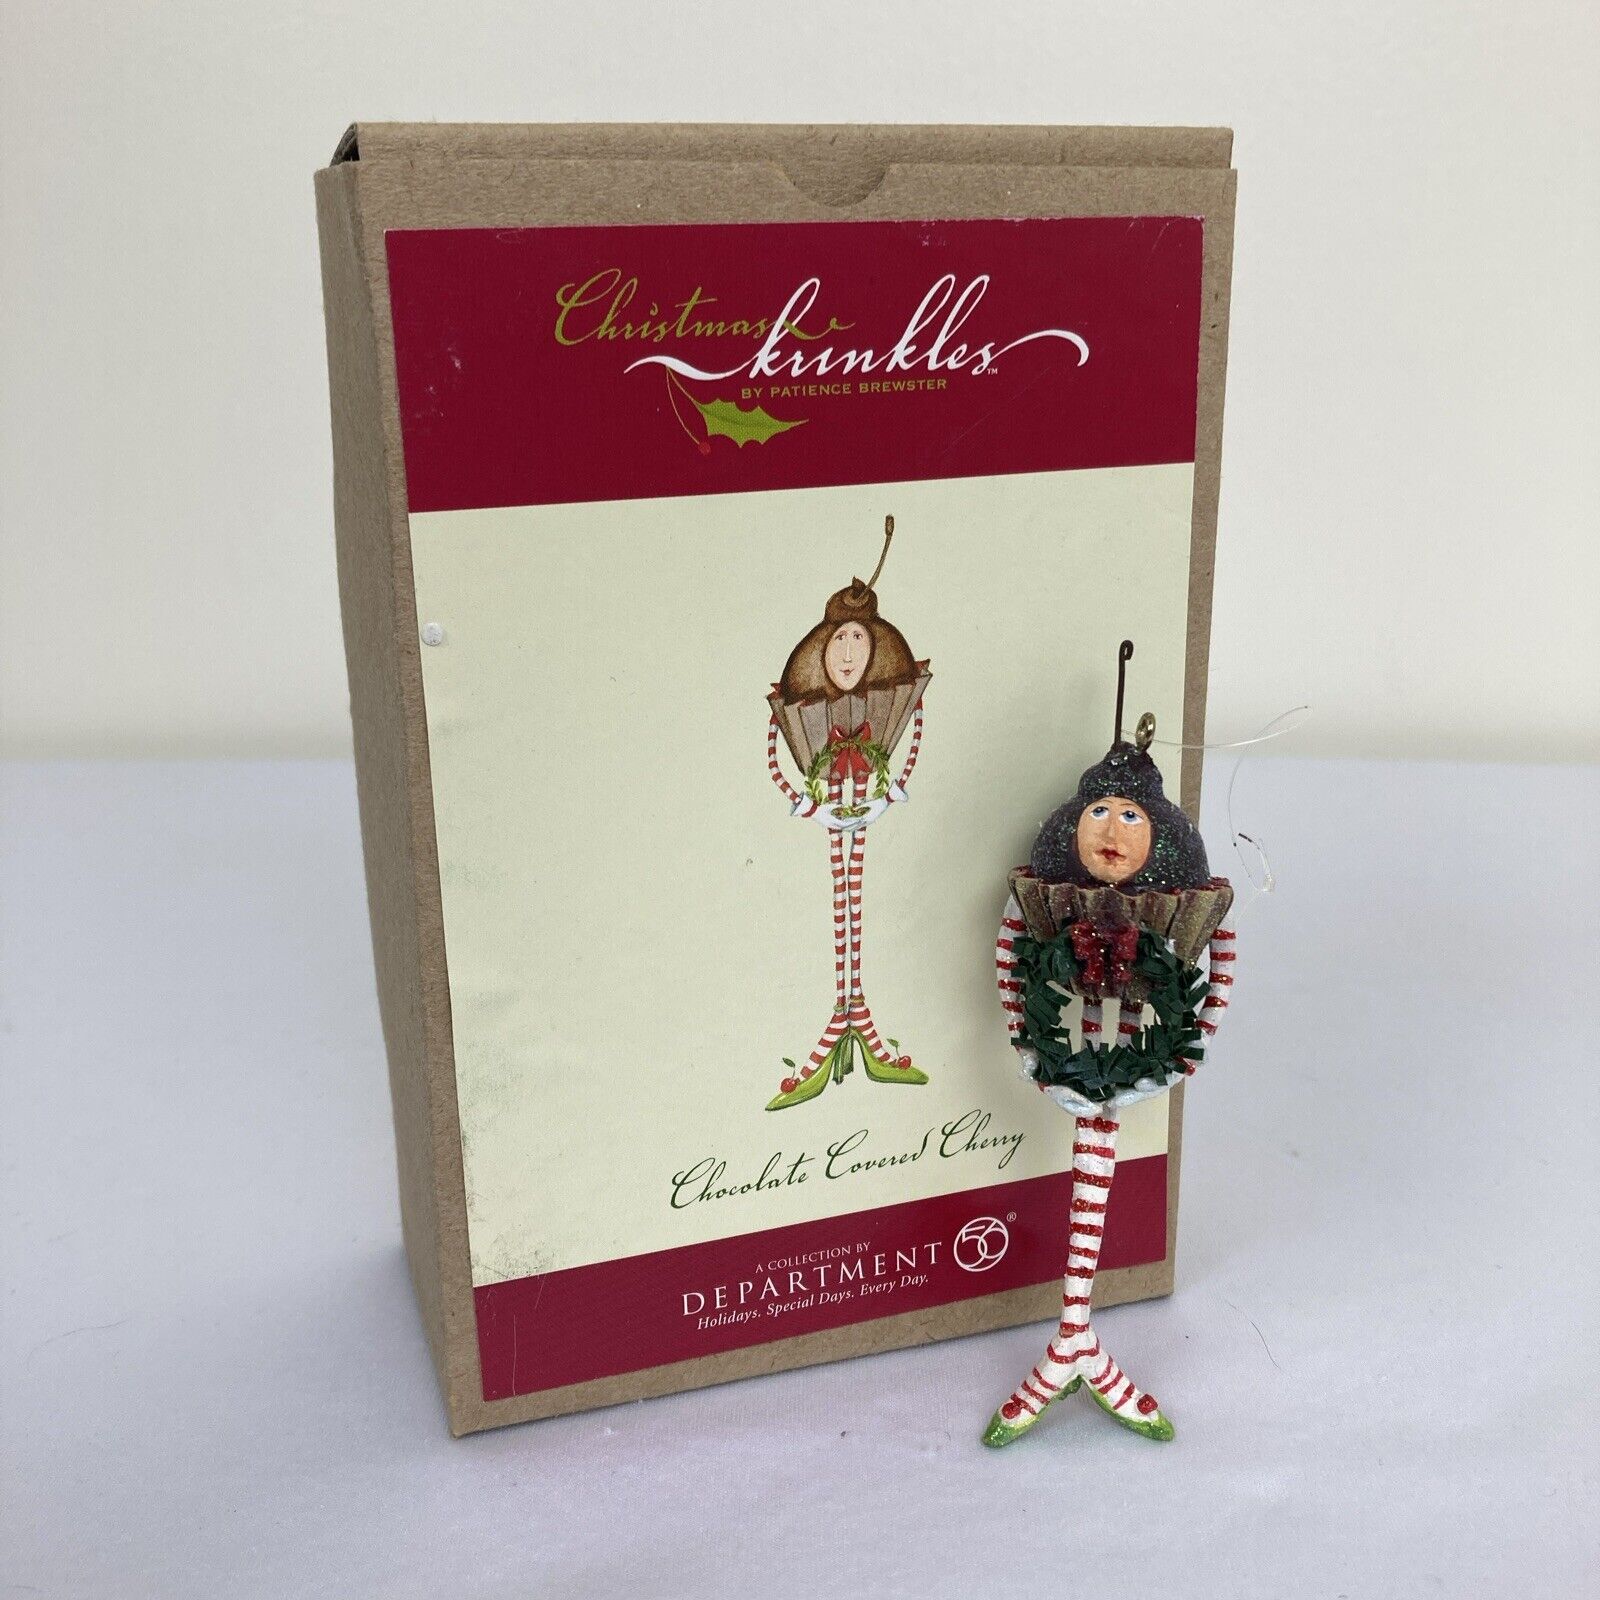 Vintage Dept 56 Christmas Krinkles Chocolate Covered Cherry Ornament (2004)